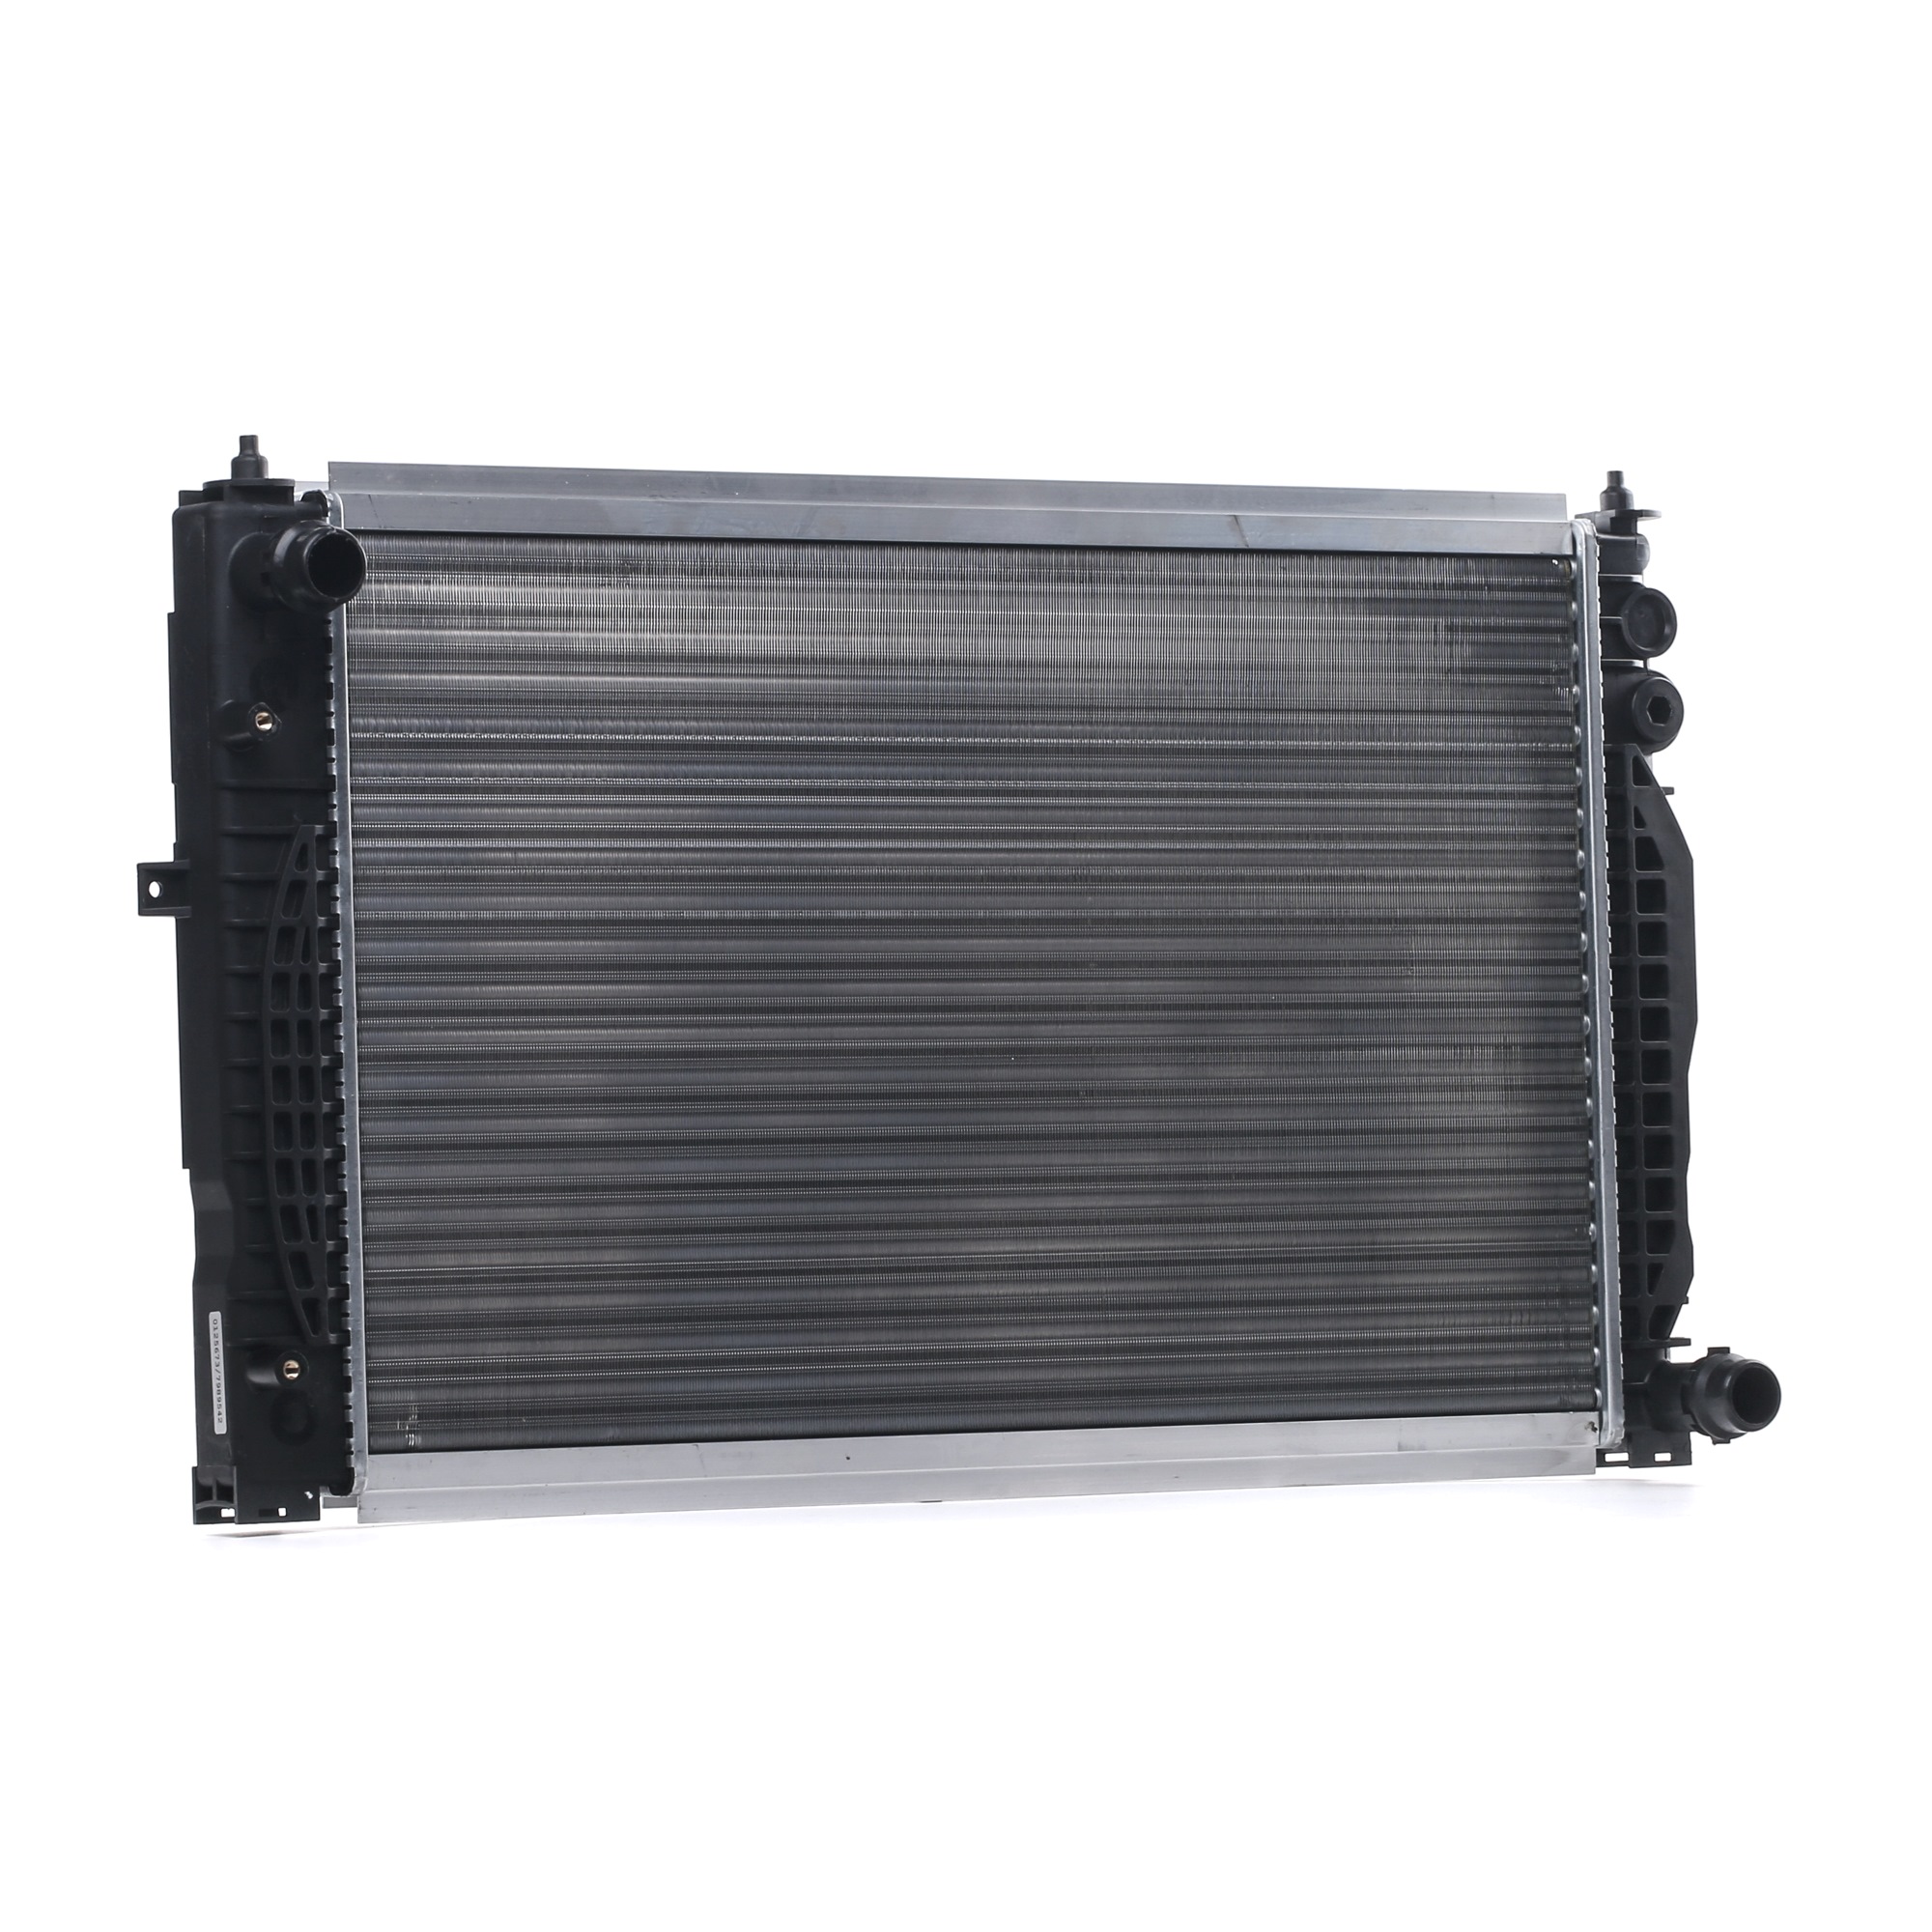 SKRD-0120395 STARK Radiators SKODA for vehicles with/without air conditioning, 630 x 397 x 32 mm, with screw, Manual Transmission, Mechanically jointed cooling fins